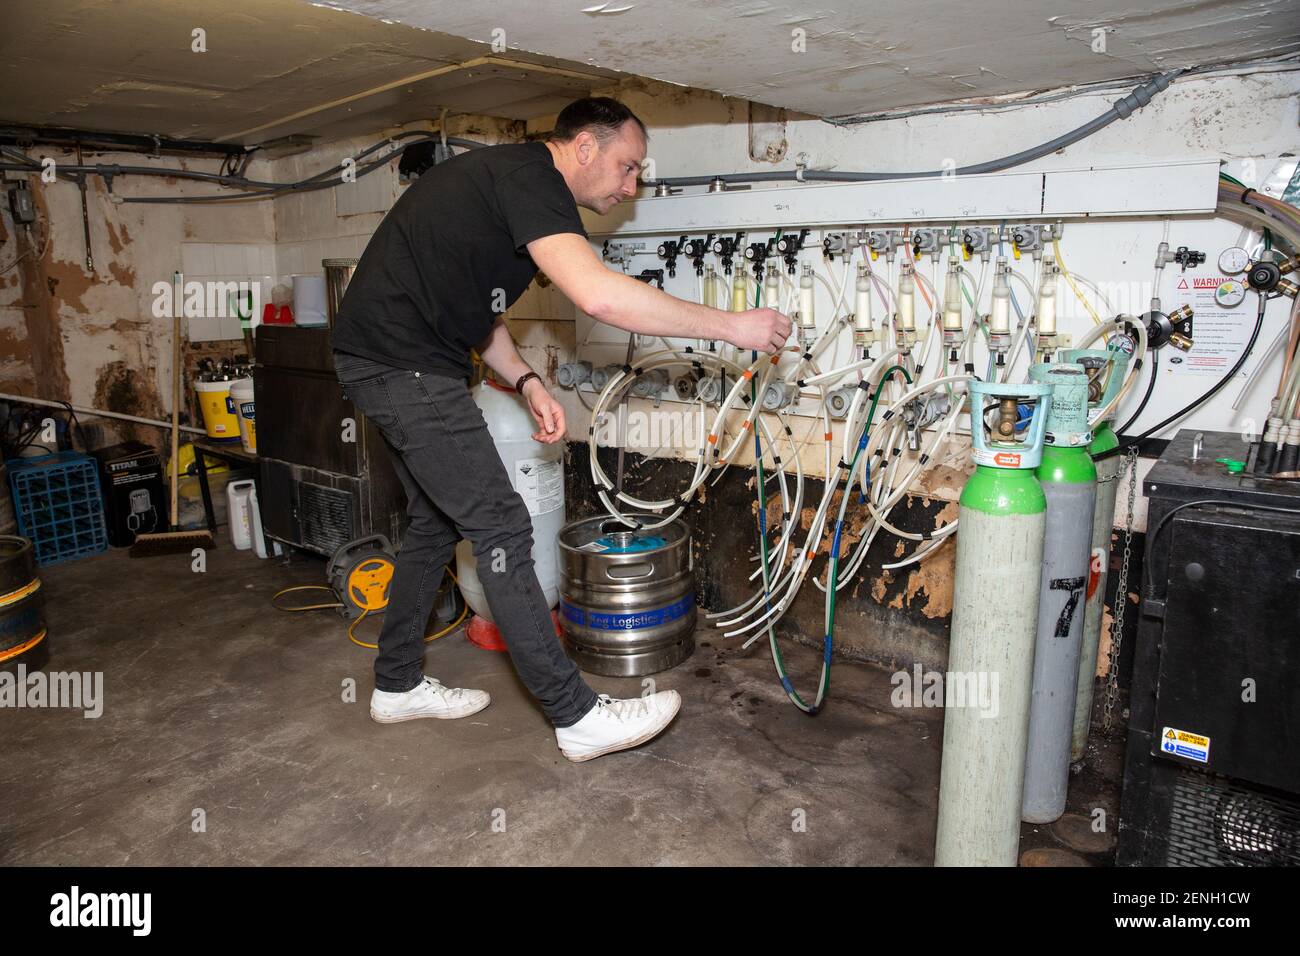 Sean Hughes landlord of 'Dylans' pub in St Albans prepares casks of beer for reopening his pub after the coronavirus lockdown#3 is lifted in England. Stock Photo